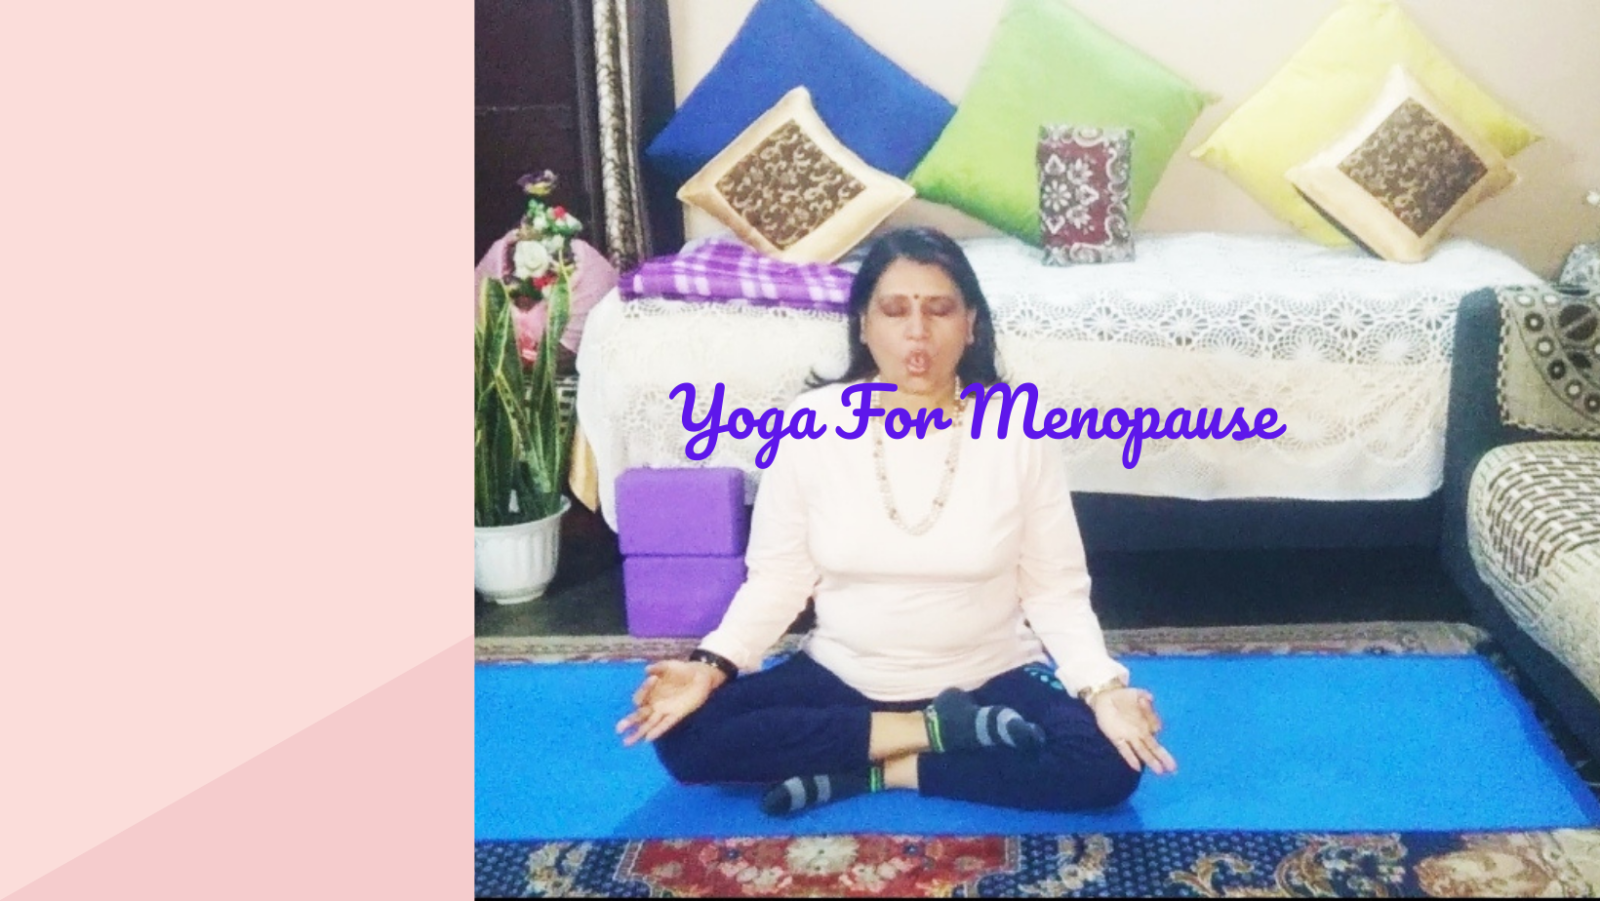 With the help of yoga healing for menopause, you can effectively get away from the most uncomfortable symptoms of pre and post menopause- hot flashes, night sweats, indigestion